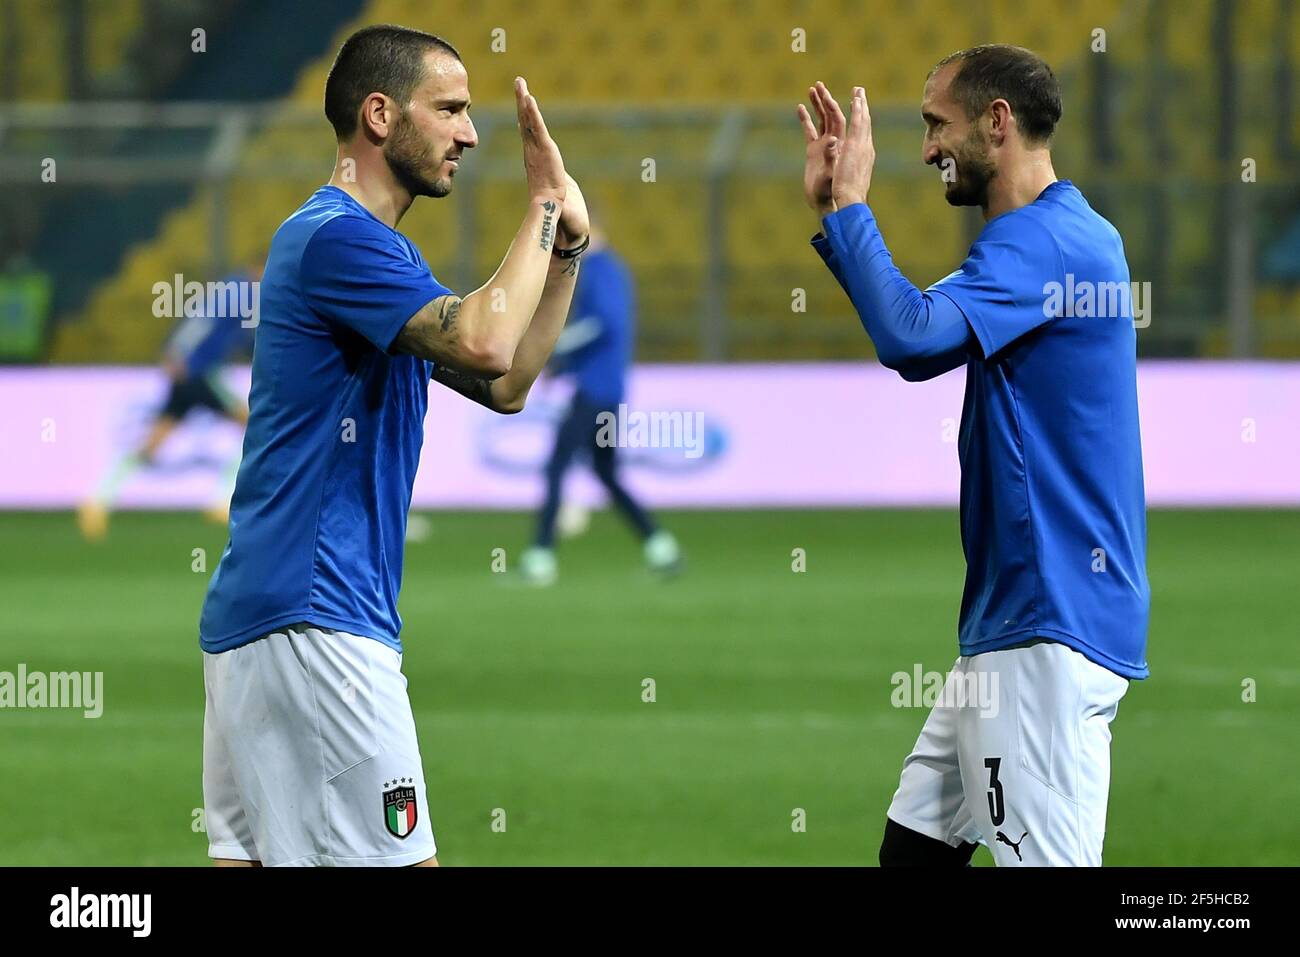 Parma, Italy. 25th Mar, 2021. Leoanrdo Bonucci and Giorgio Chiellini of Italy during the FIFA World Cup 2022 qualification football match between Italy and Northerrn Ireland at stadio Ennio Tardini in Parma (Italy), March 25th, 2021. Photo Andrea Staccioli/Insidefoto Credit: insidefoto srl/Alamy Live News Stock Photo